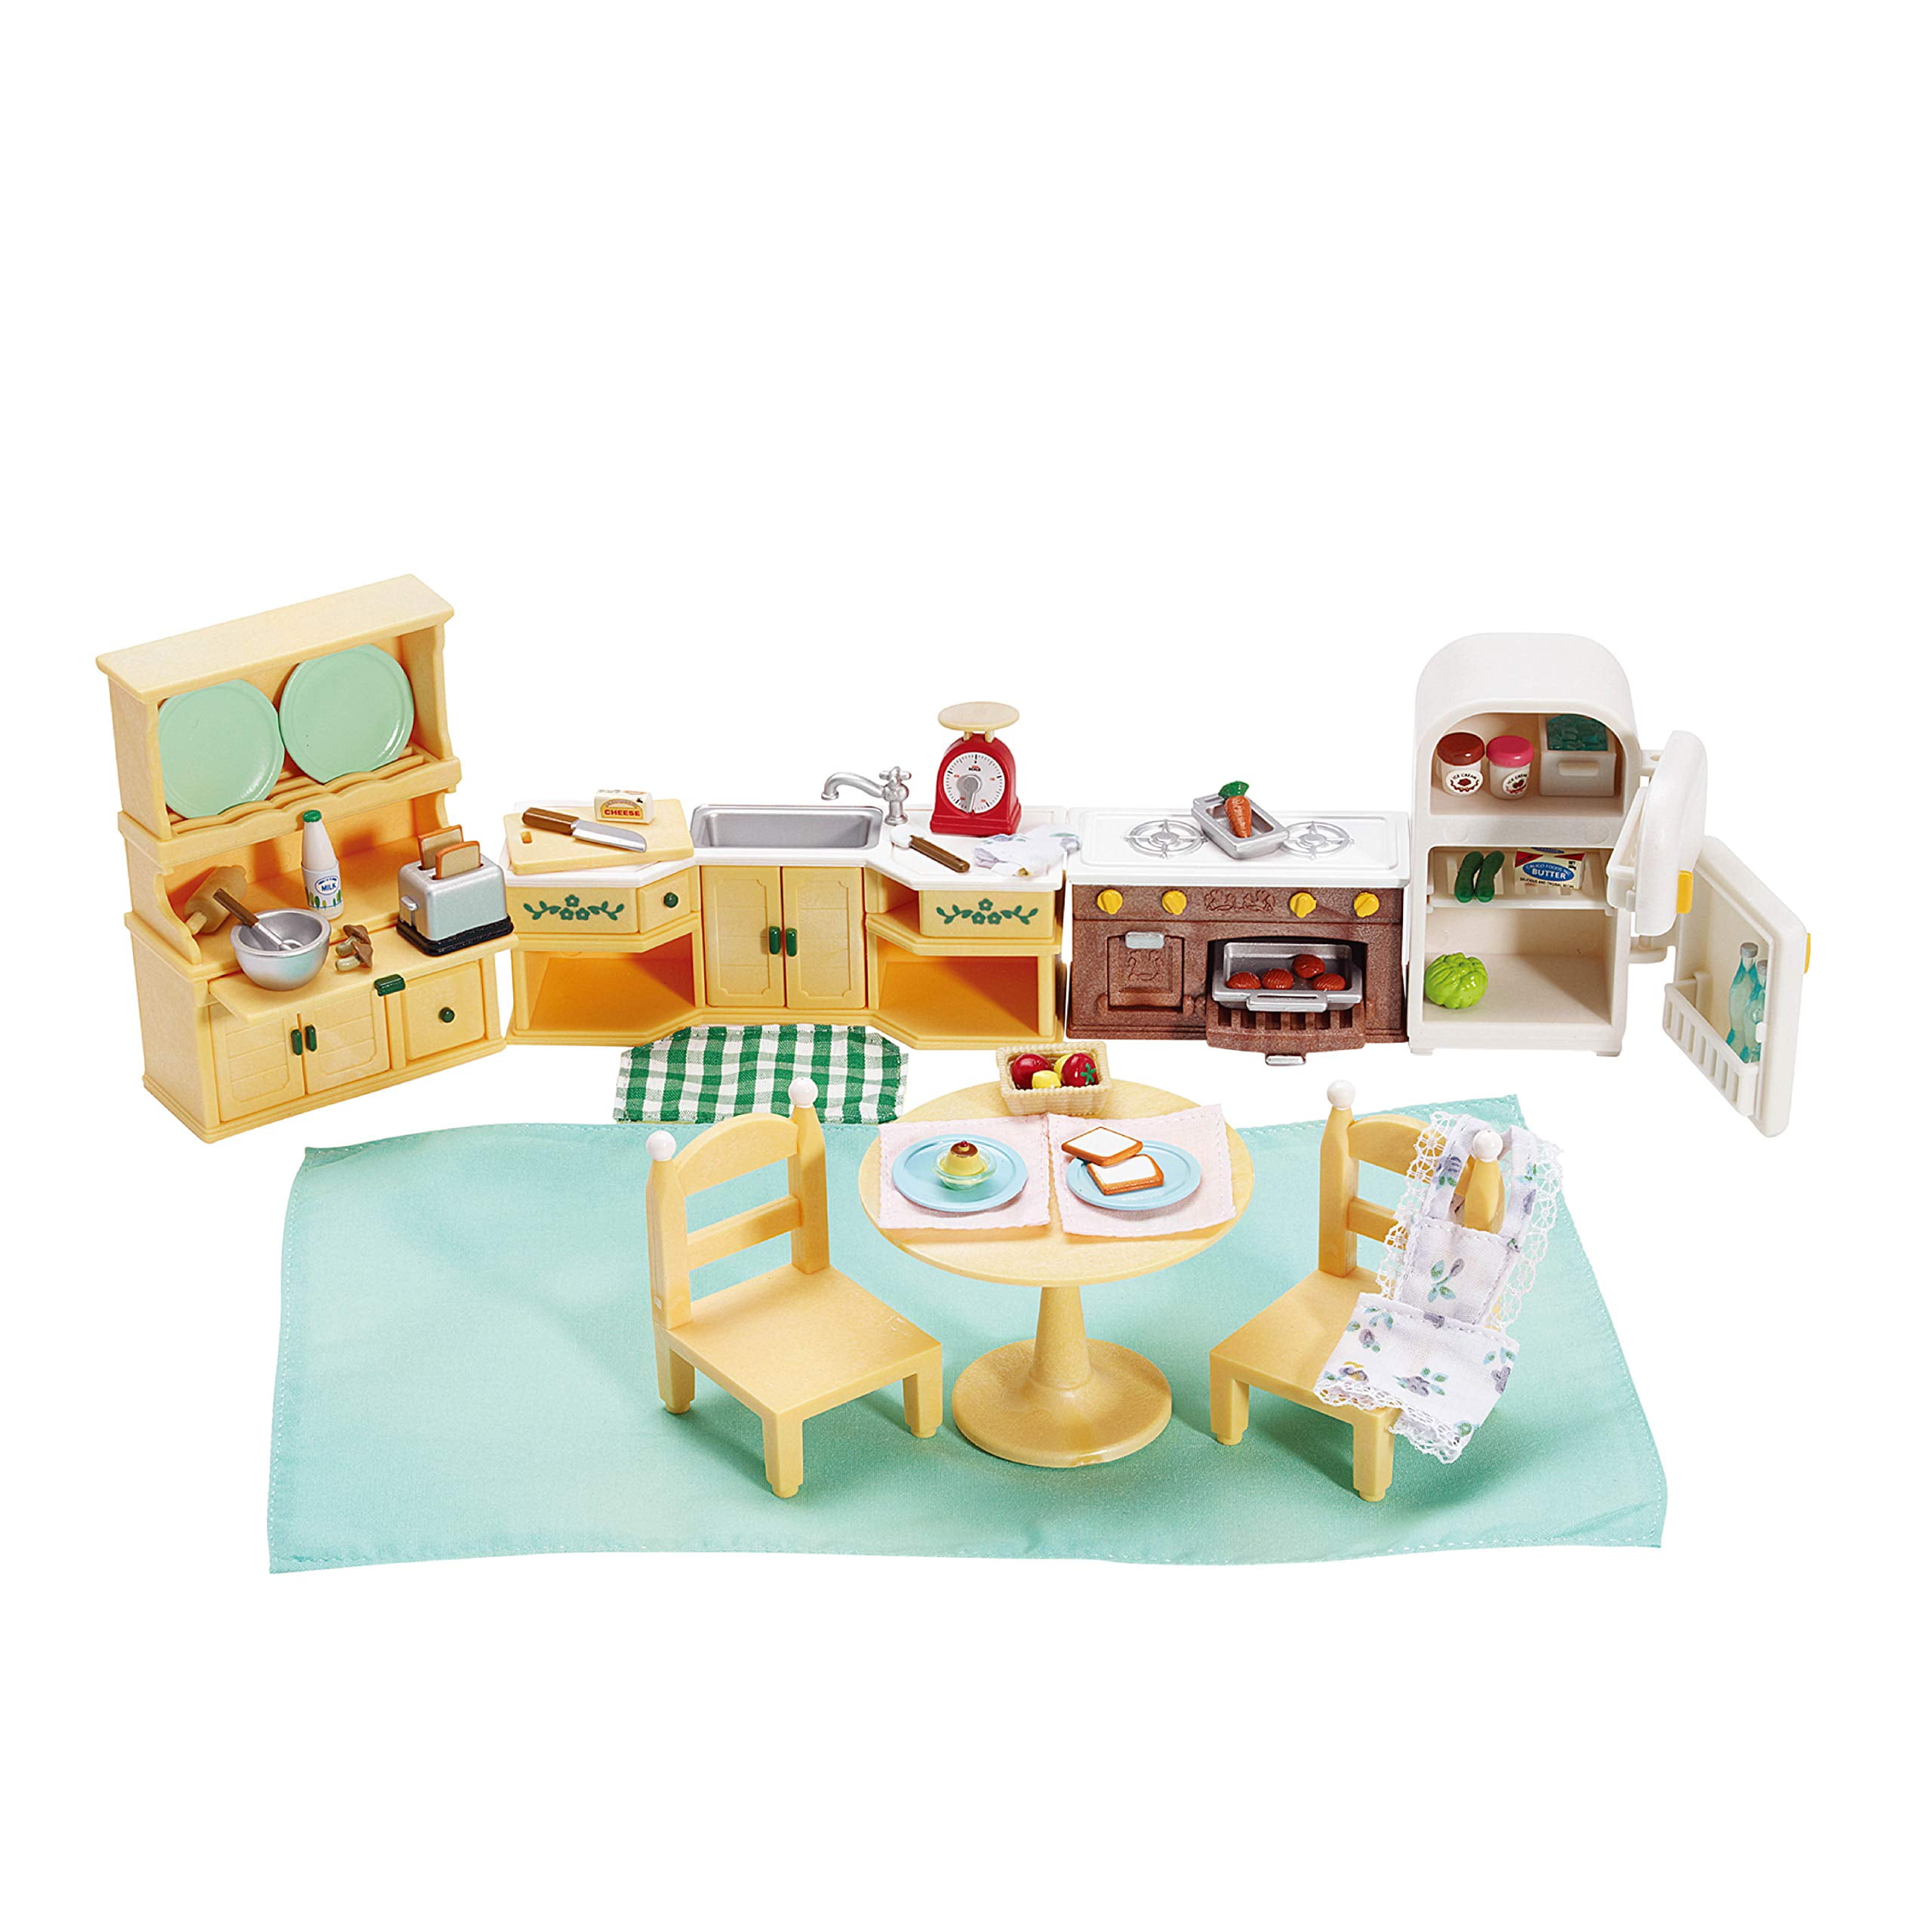 Calico Critters Kozy Kitchen Furniture Preschool Play Set Toy Doll Accessories 